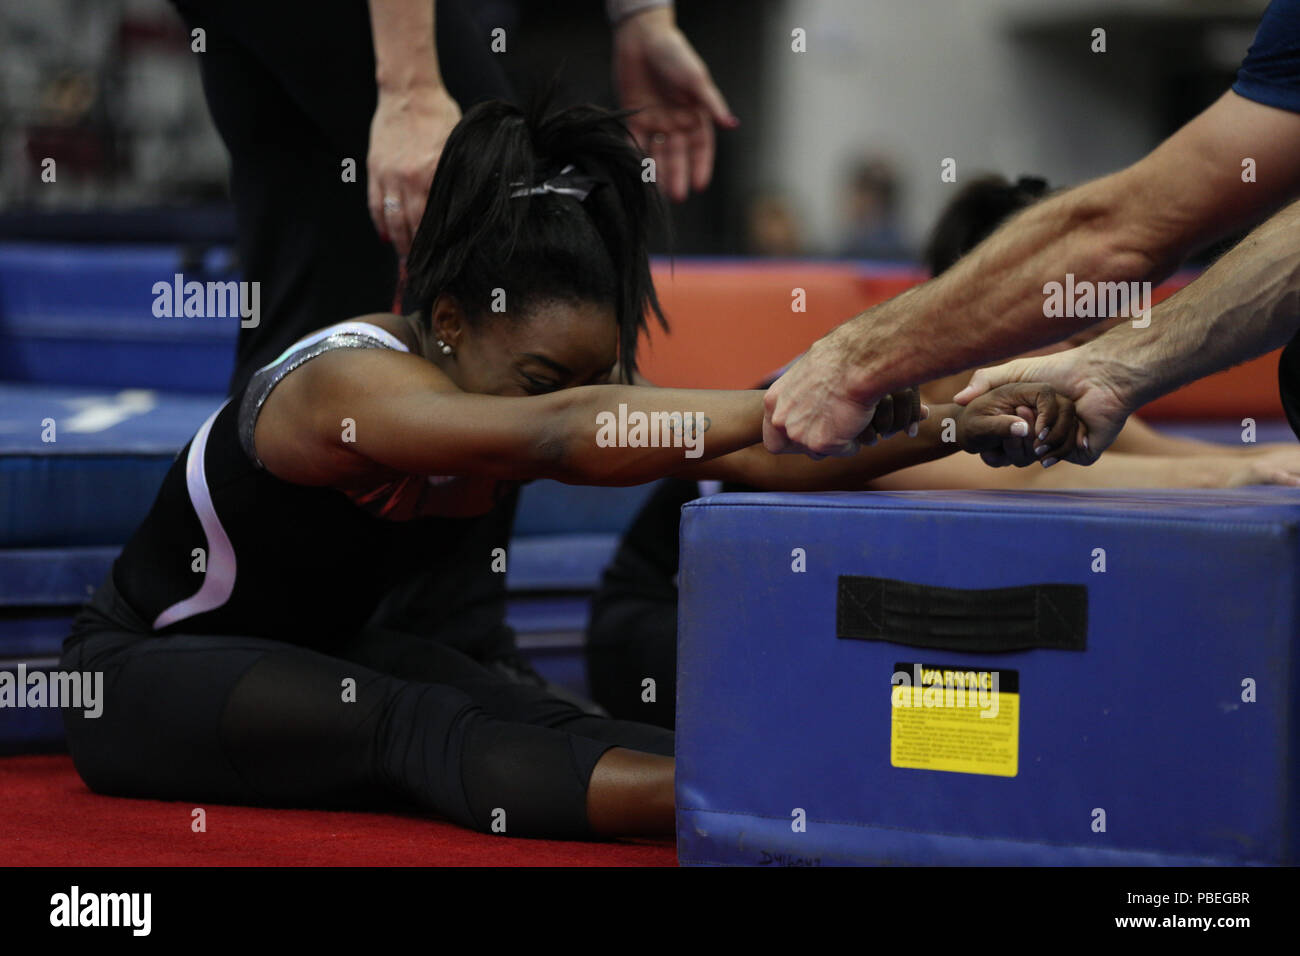 https://c8.alamy.com/comp/PBEGBR/ohio-usa-27th-july-2018-simone-biles-receives-extra-stretching-from-her-coaches-during-podium-training-before-the-gk-us-classic-this-is-biles-first-competition-since-winning-the-gymnastics-all-around-gold-at-the-2016-rio-olympic-games-melissa-j-perensoncsm-credit-cal-sport-mediaalamy-live-news-PBEGBR.jpg